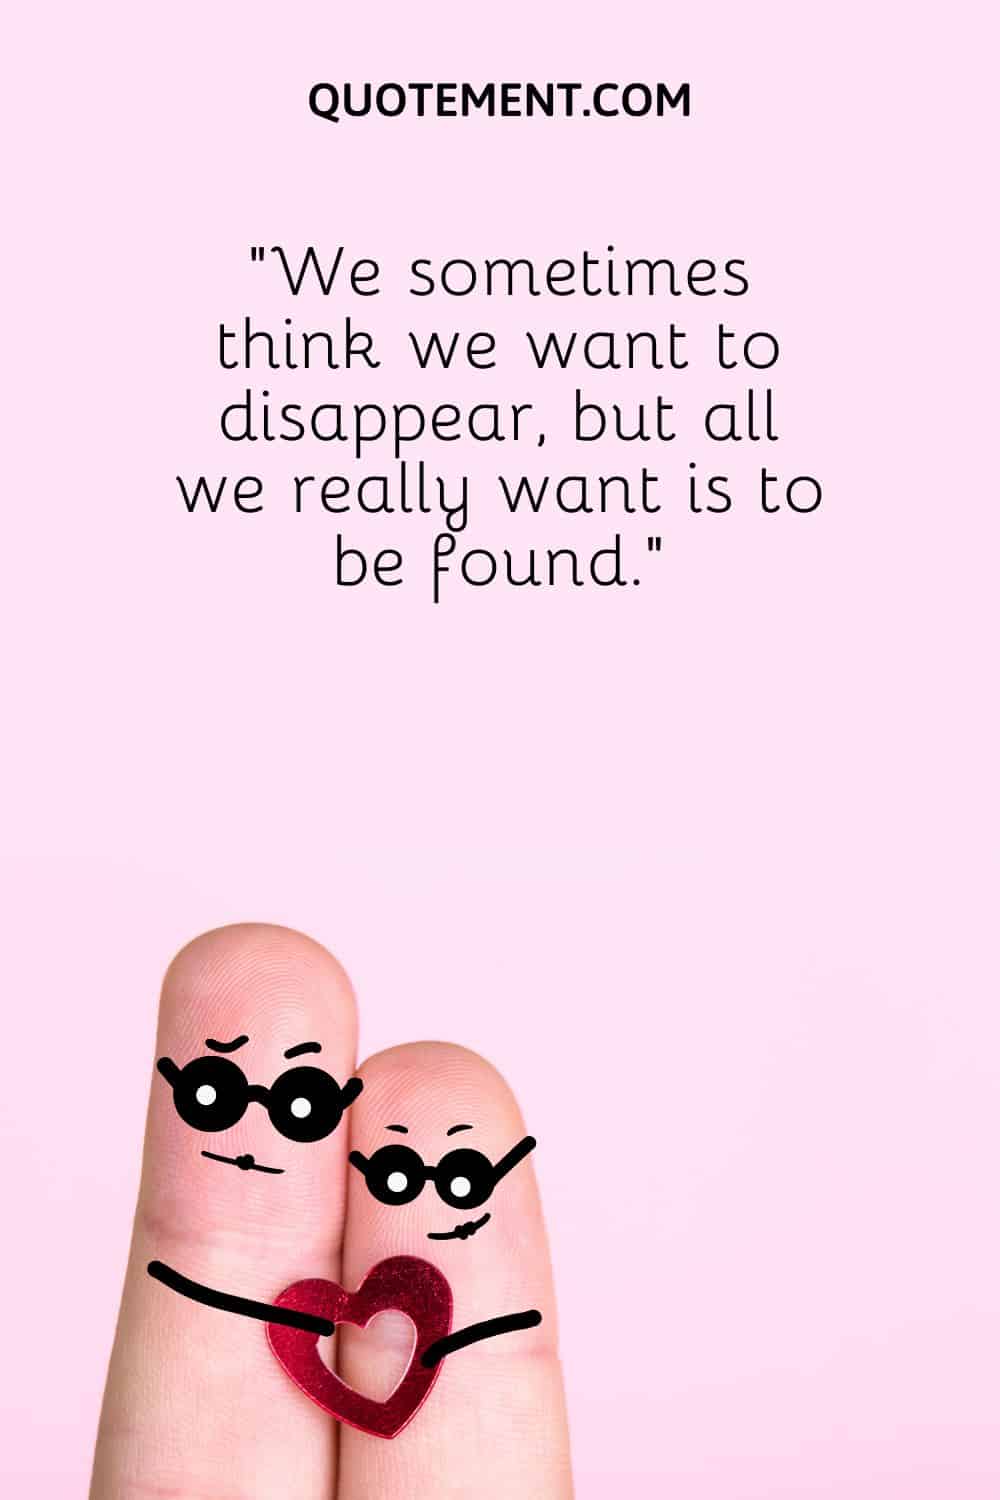 “We sometimes think we want to disappear, but all we really want is to be found.”